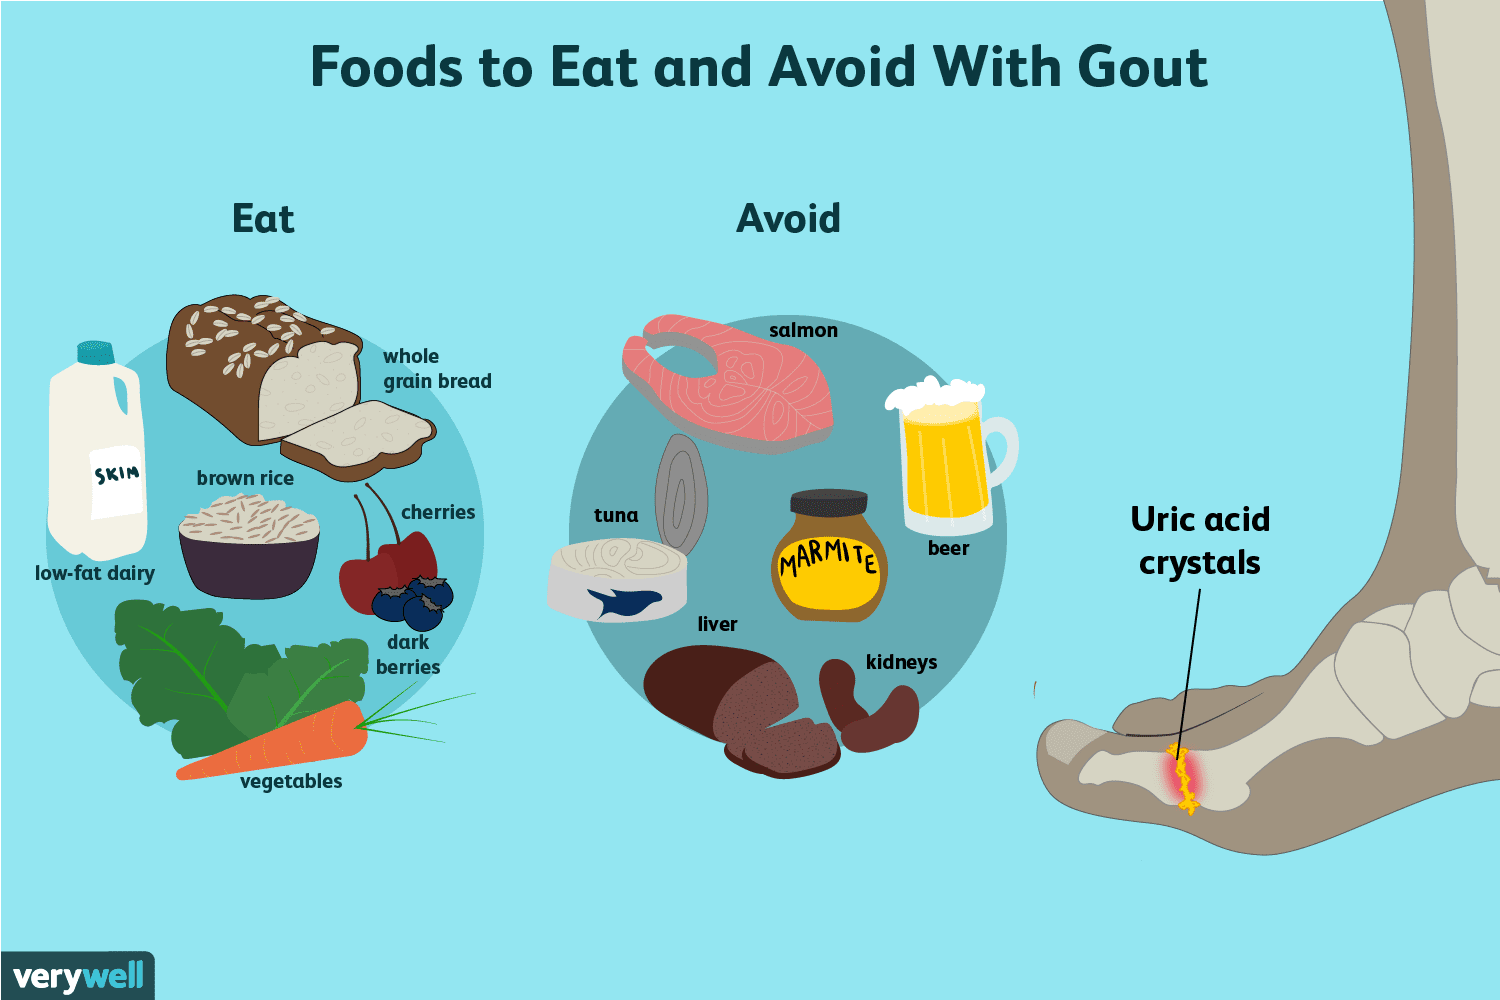 Gout: What to Eat for Better Management